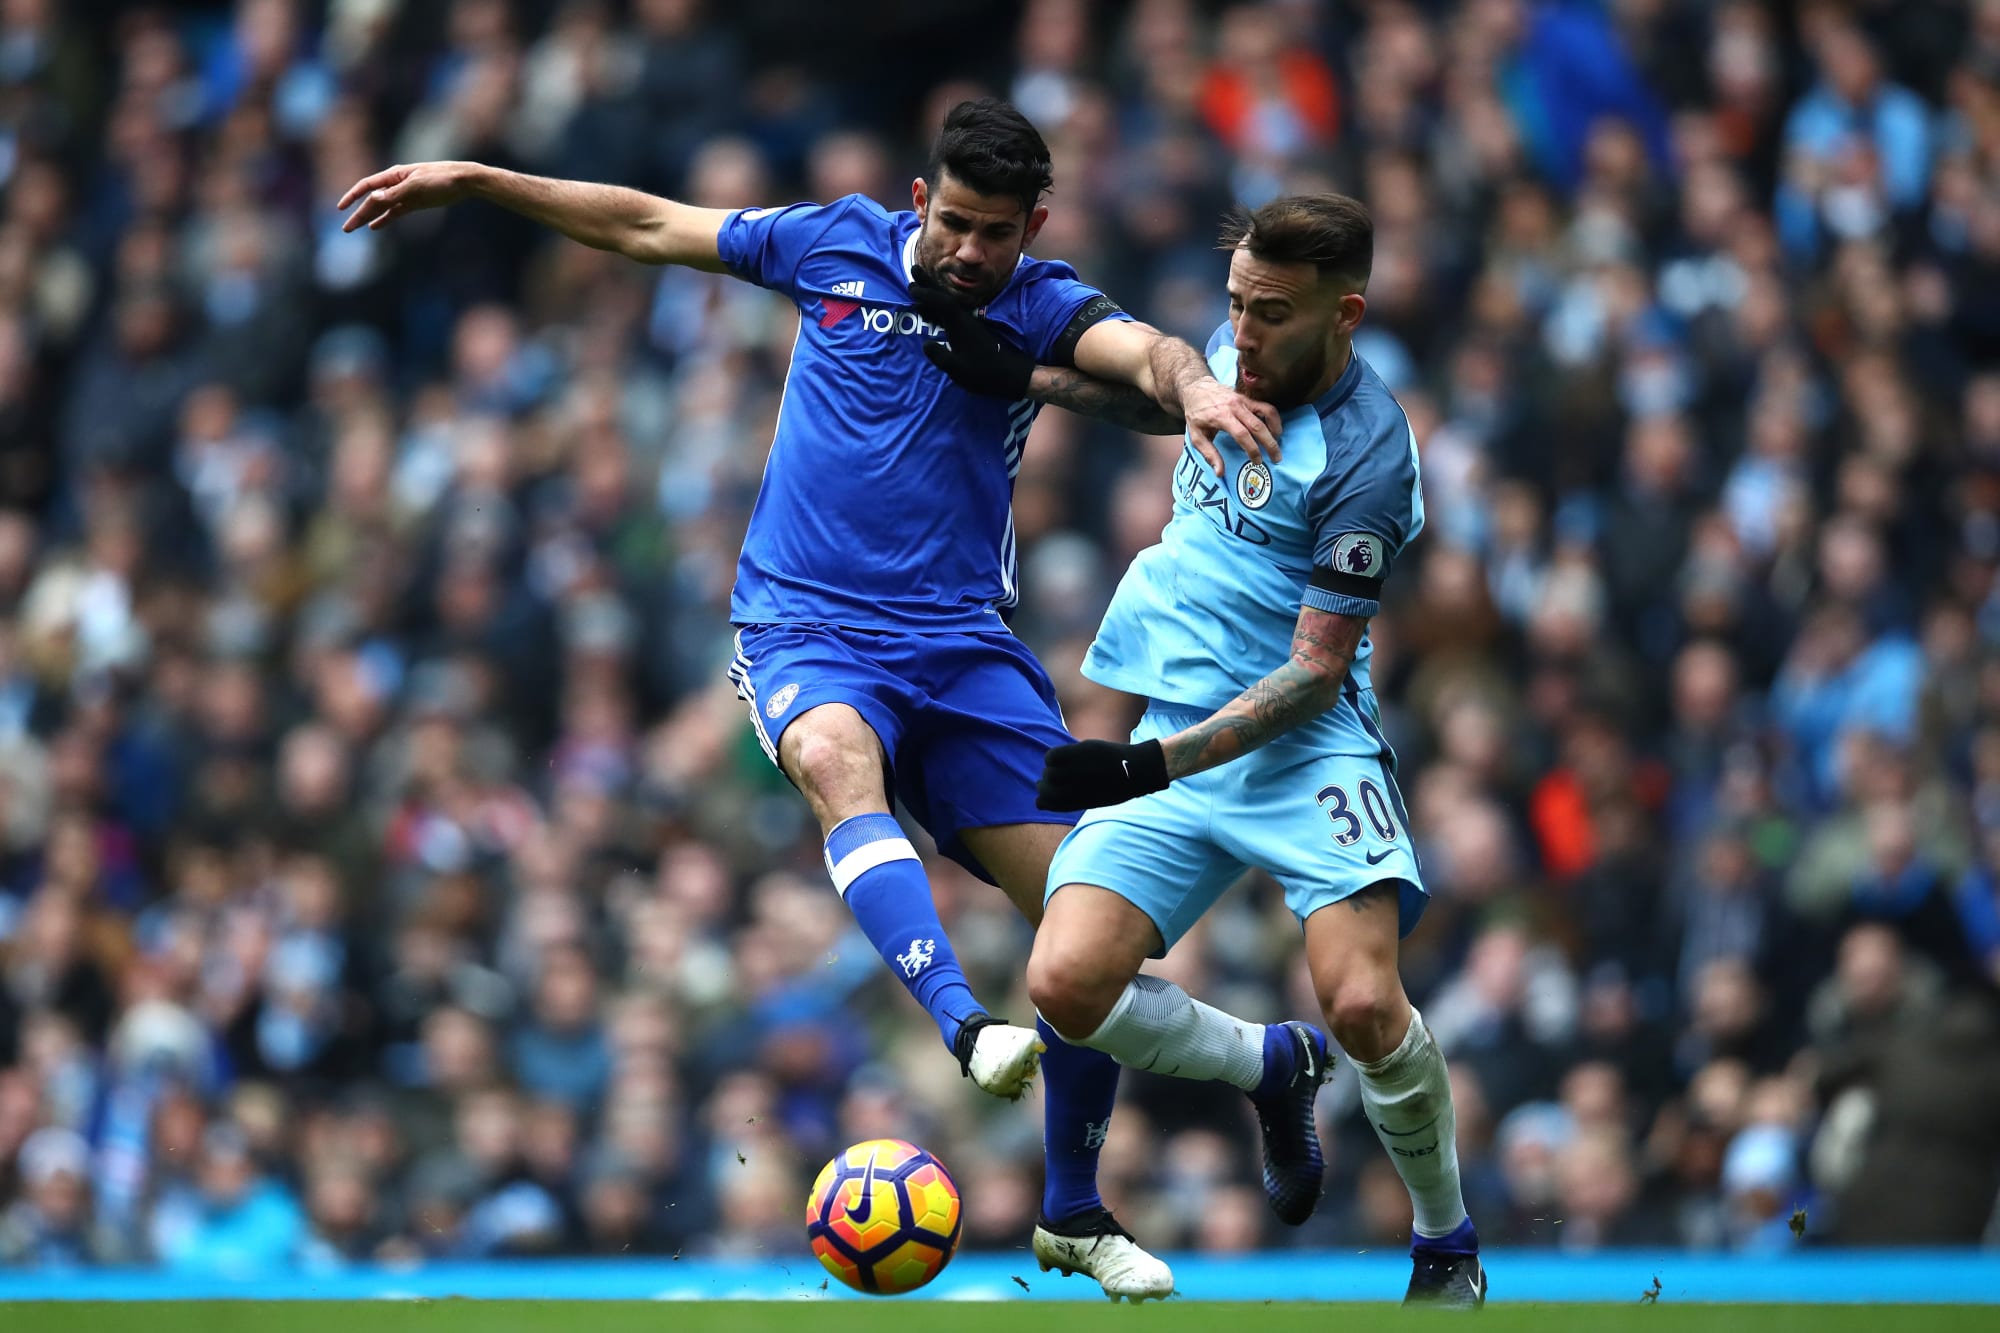 Chelsea 2-1 Manchester City: Highlights and recap